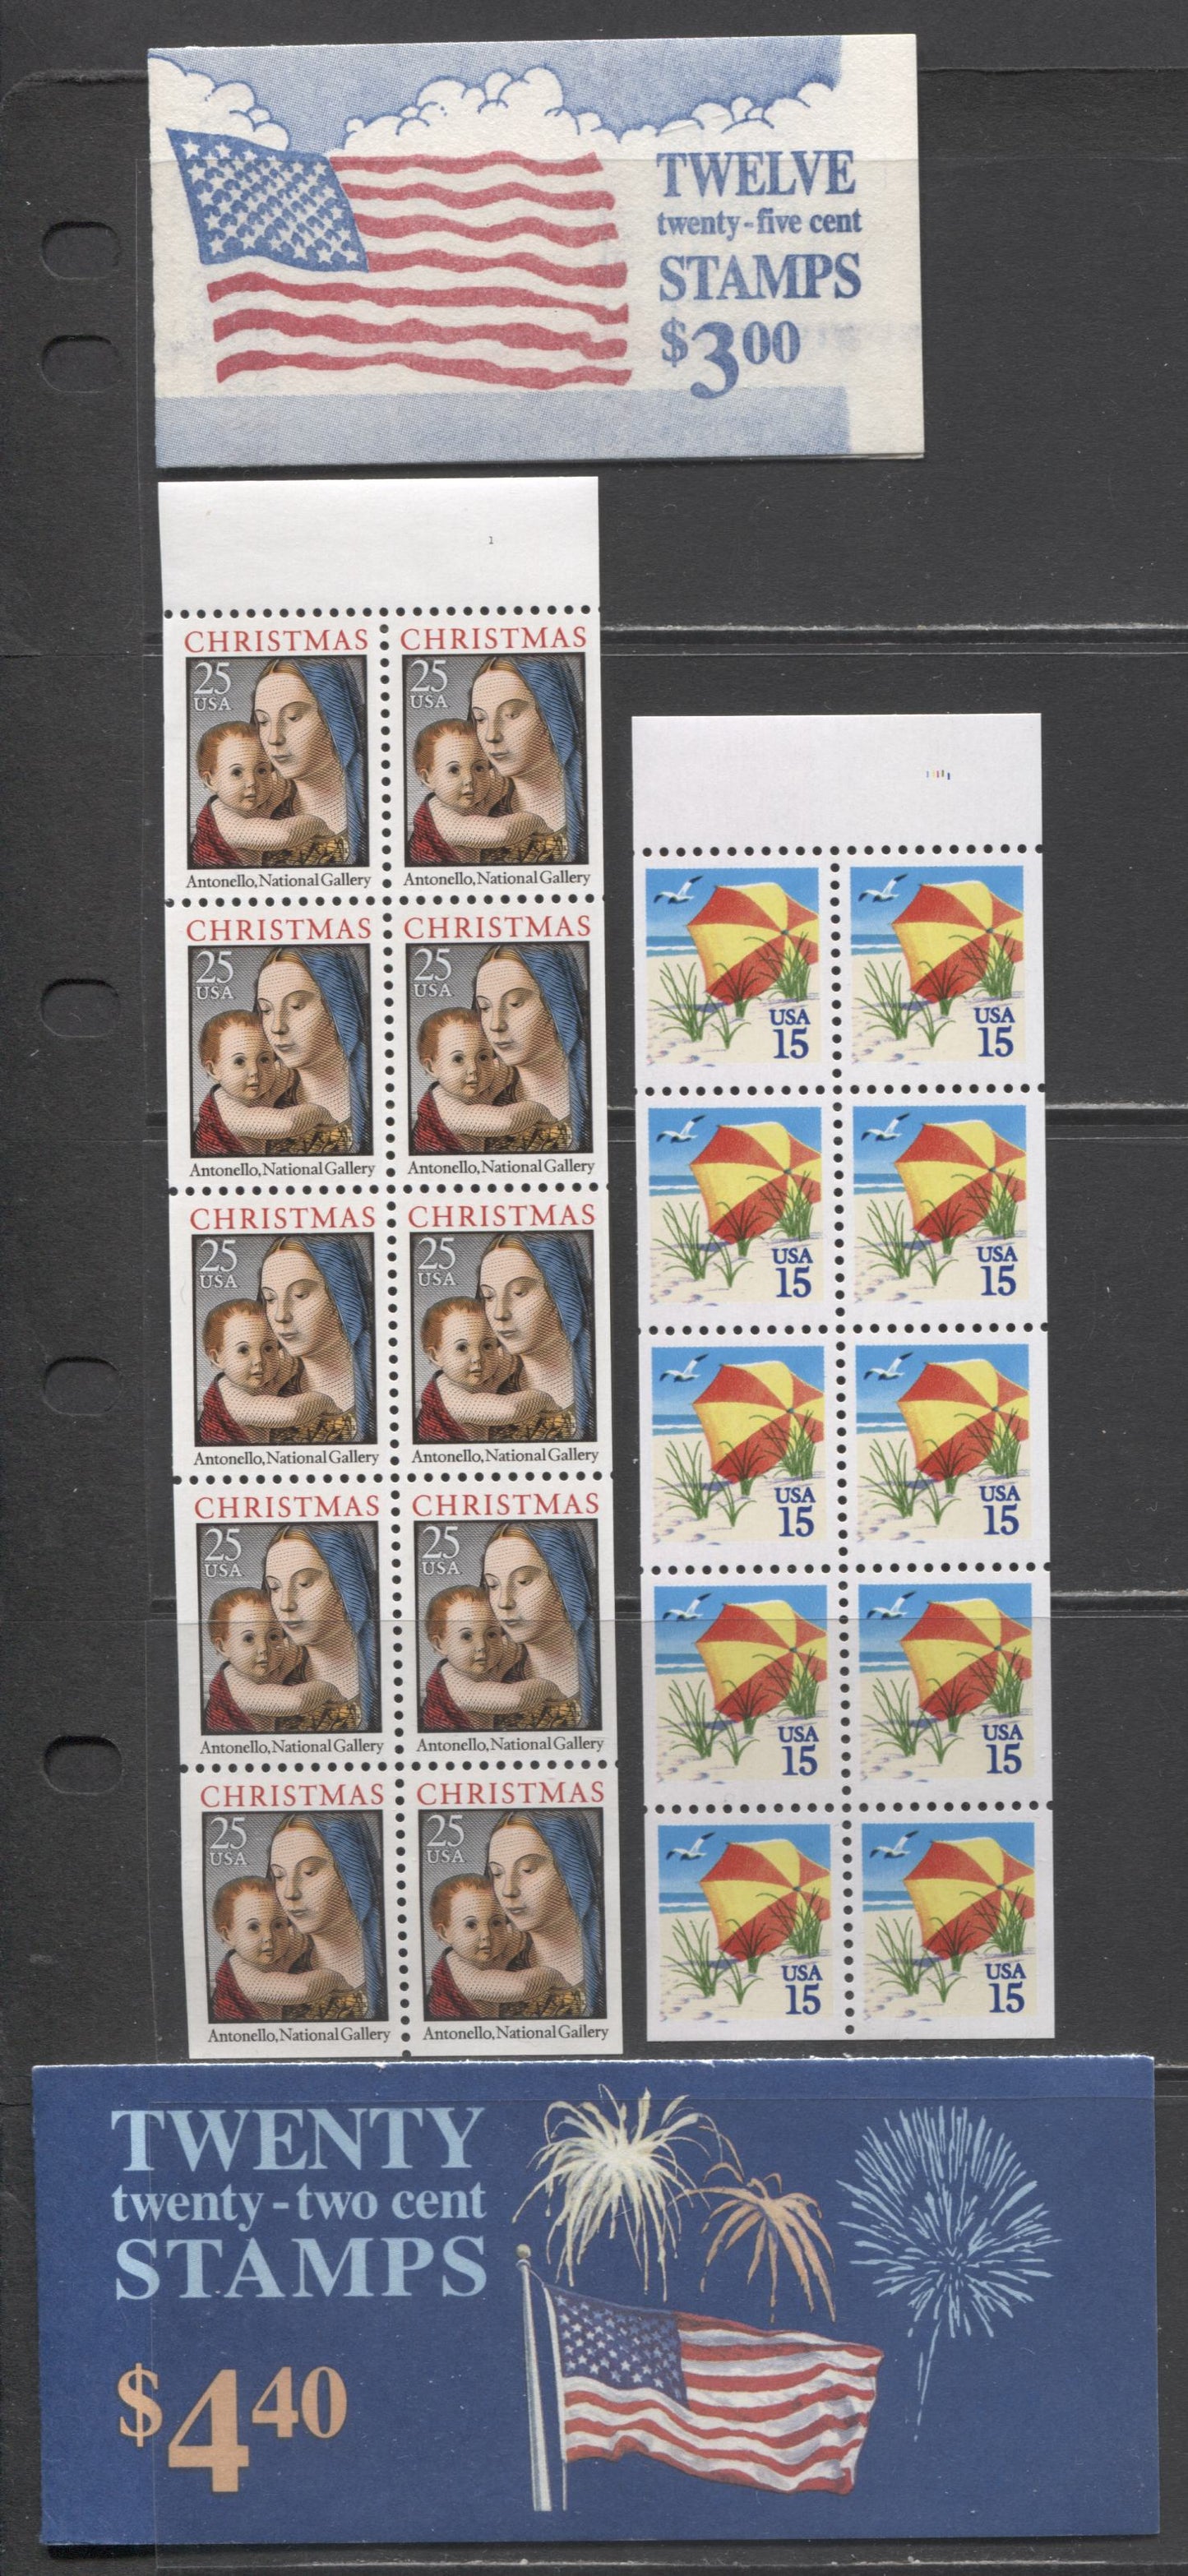 Lot 77 United States SC#2276a/2514b 1987-1990 Flags, Beach Umbrella & Christmas Issues, 4 VFNH Blocks Of 10 And Booklets Of 12 & 20, Click on Listing to See ALL Pictures, 2017 Scott Cat. $21.5